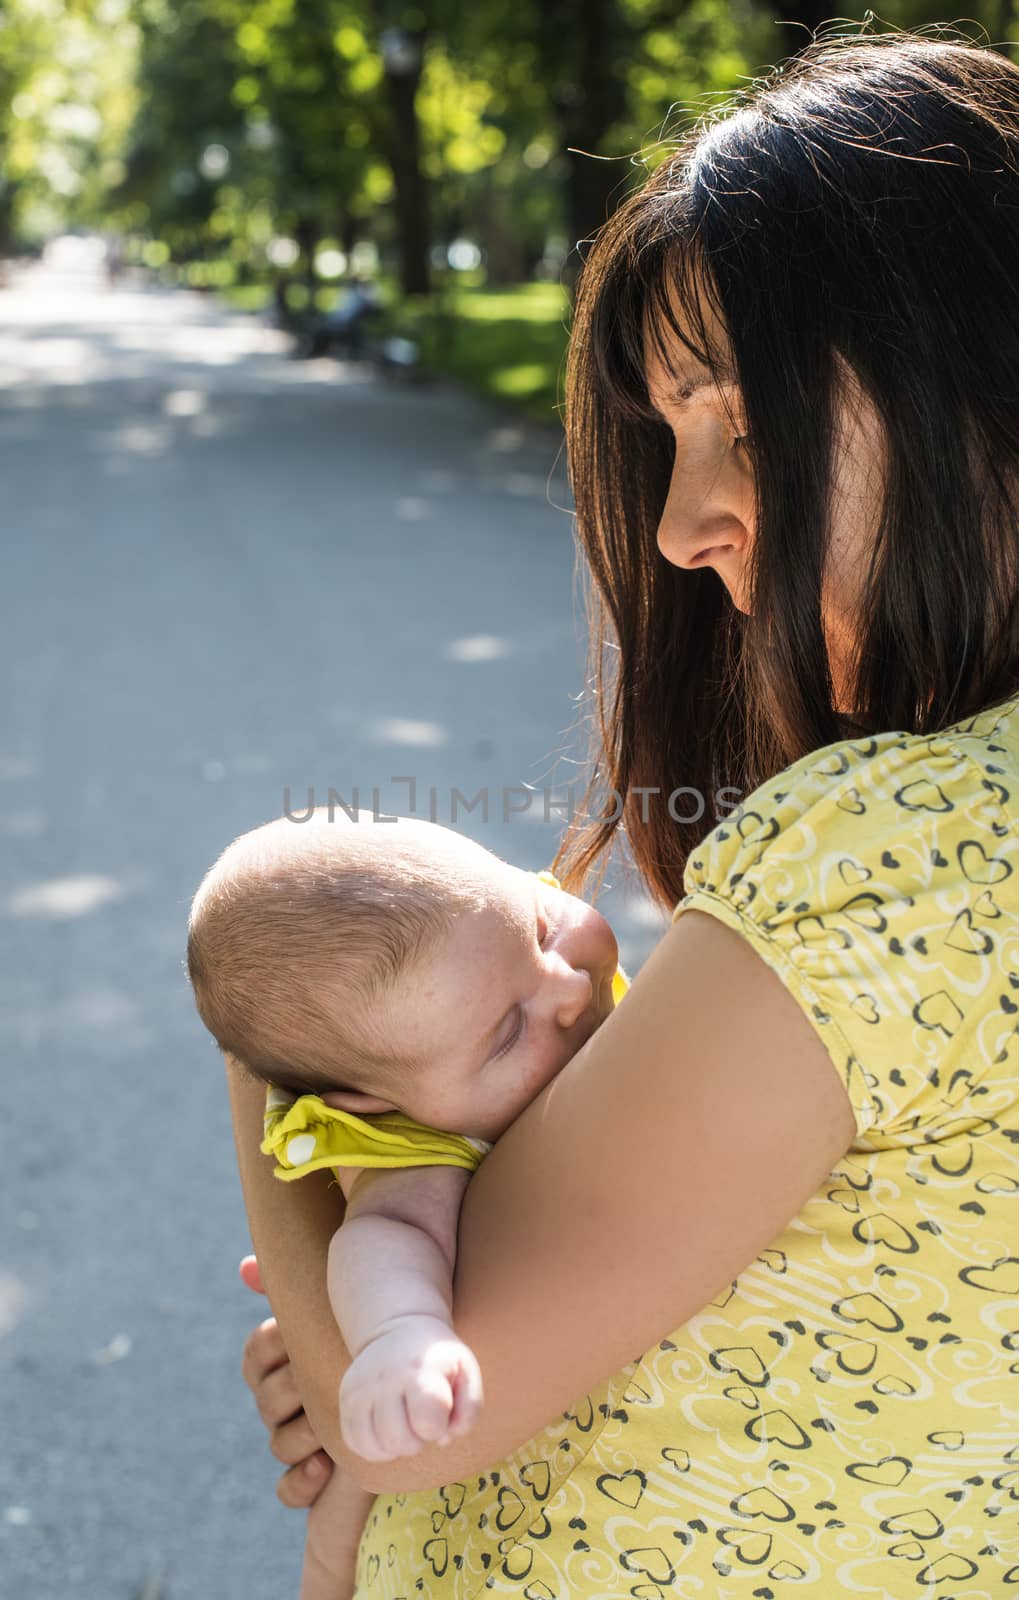 Women and baby in a park. Sunny day